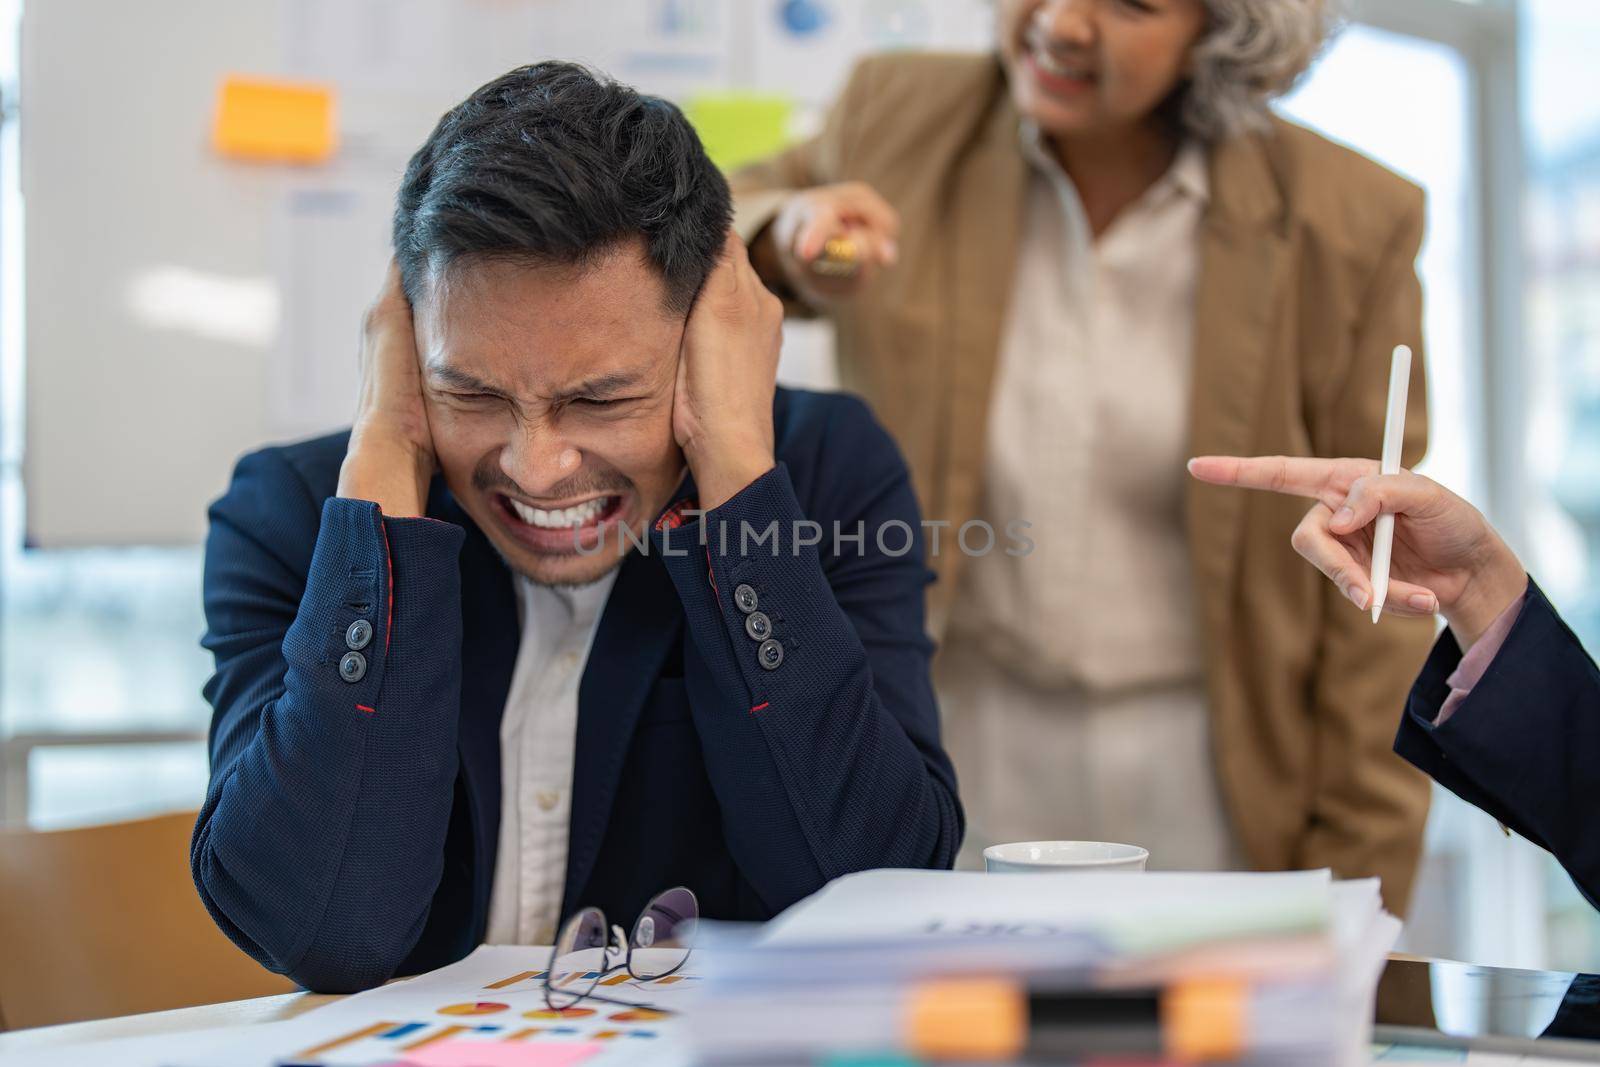 Stressed annoyed office employee having headache migraine at business finance meeting.